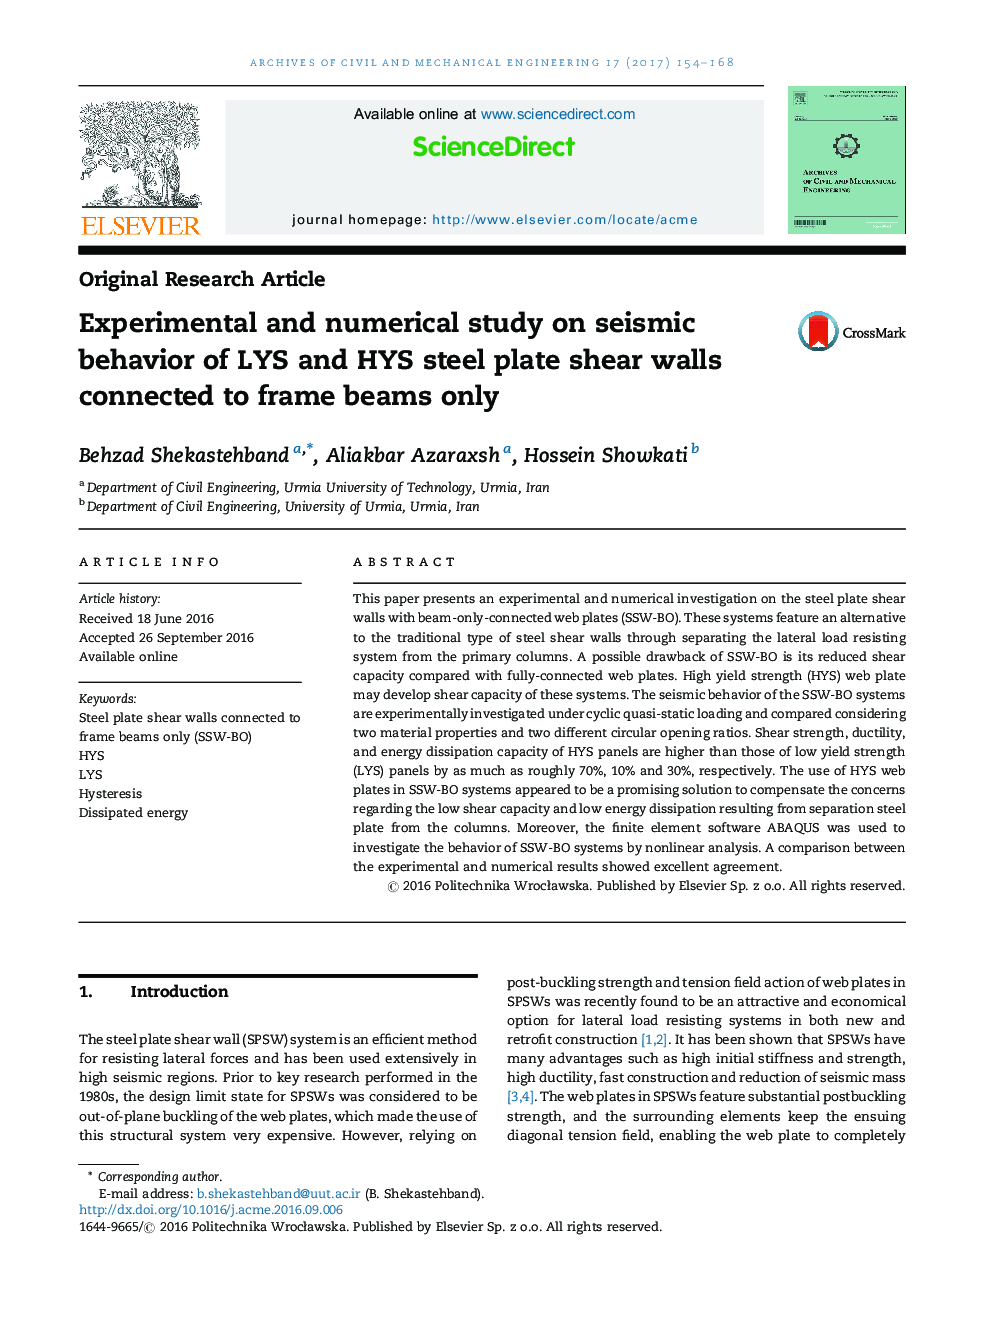 Experimental and numerical study on seismic behavior of LYS and HYS steel plate shear walls connected to frame beams only